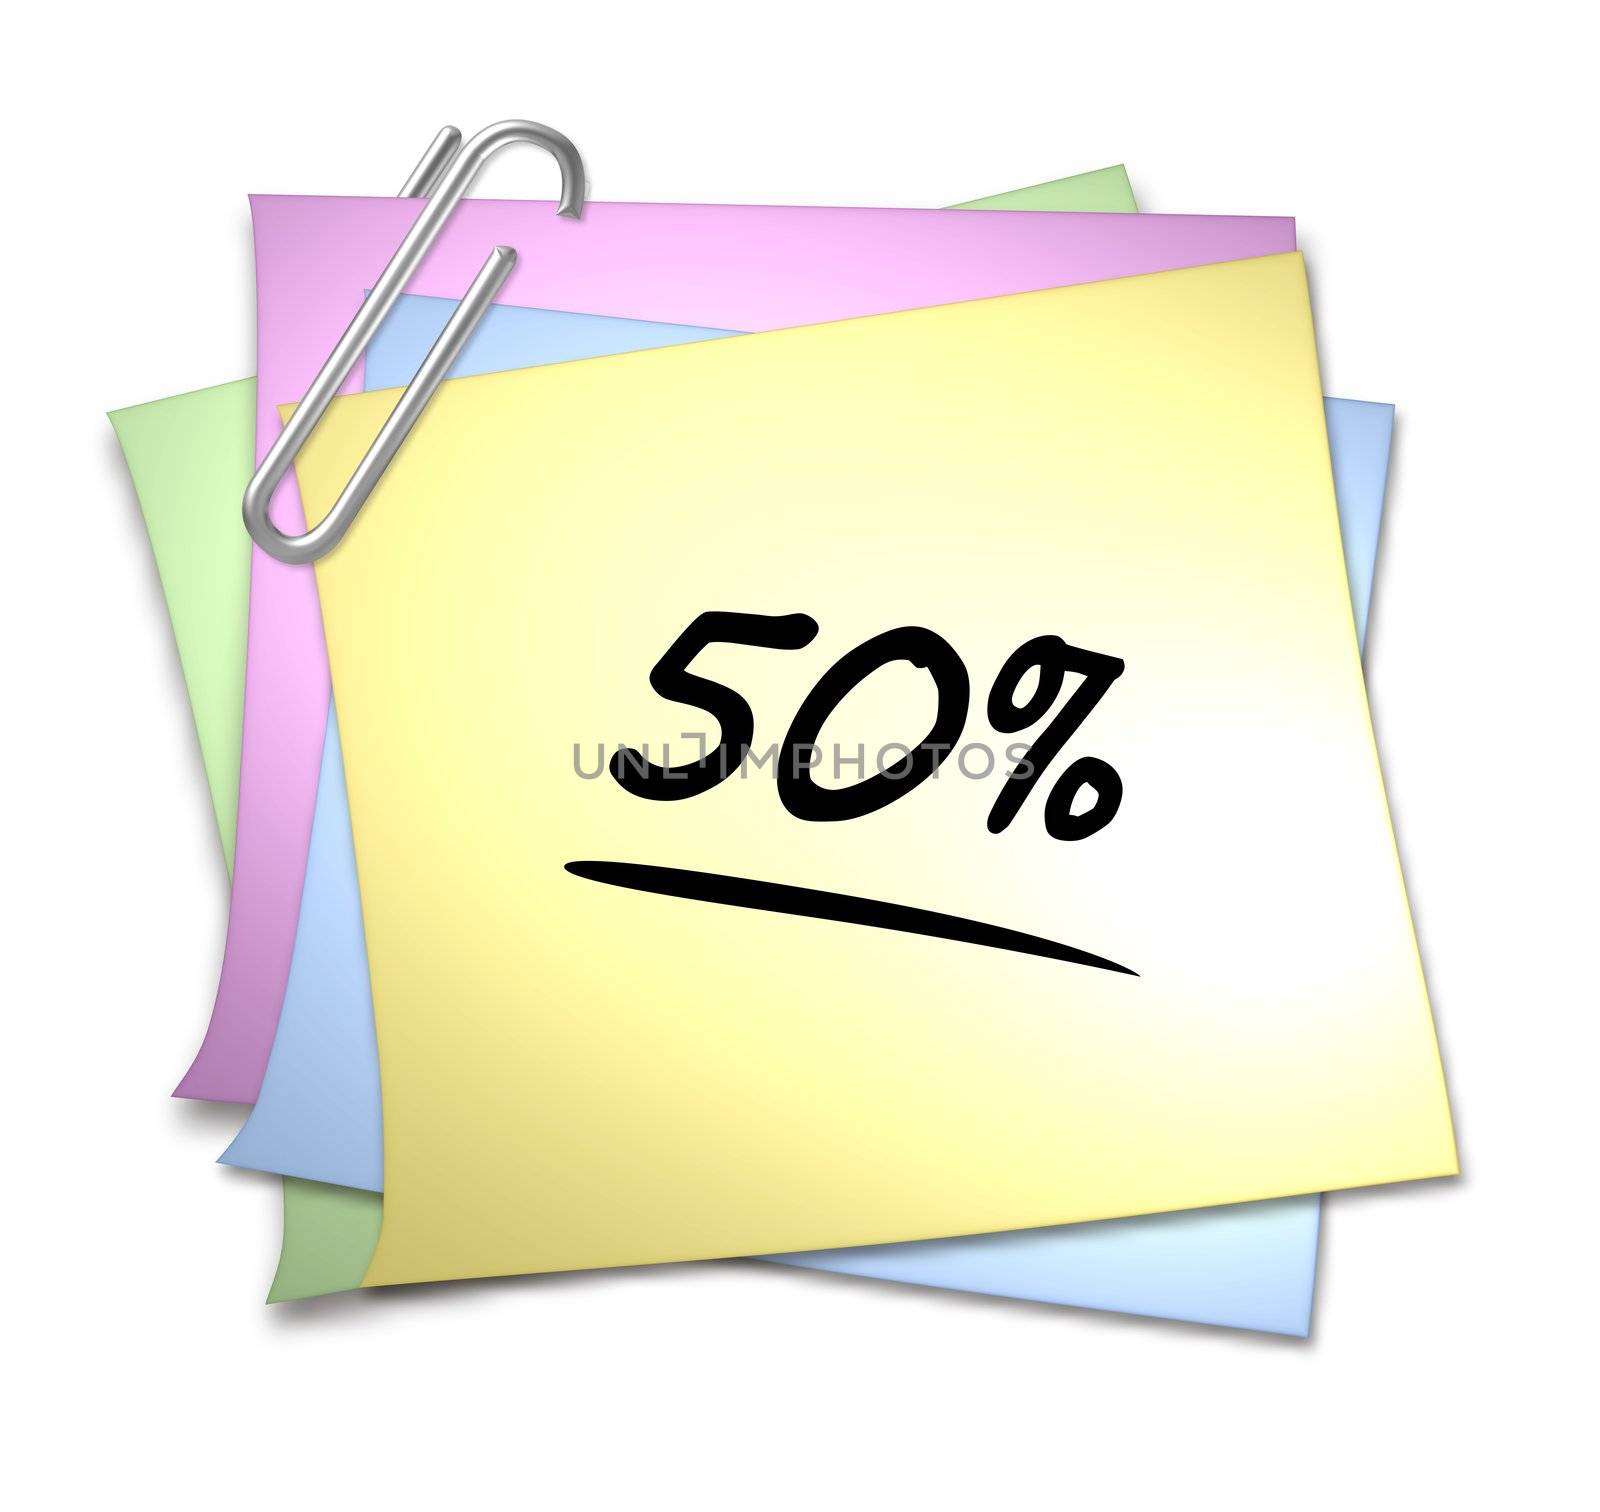 Memo with Paper Clip - 50 % by peromarketing